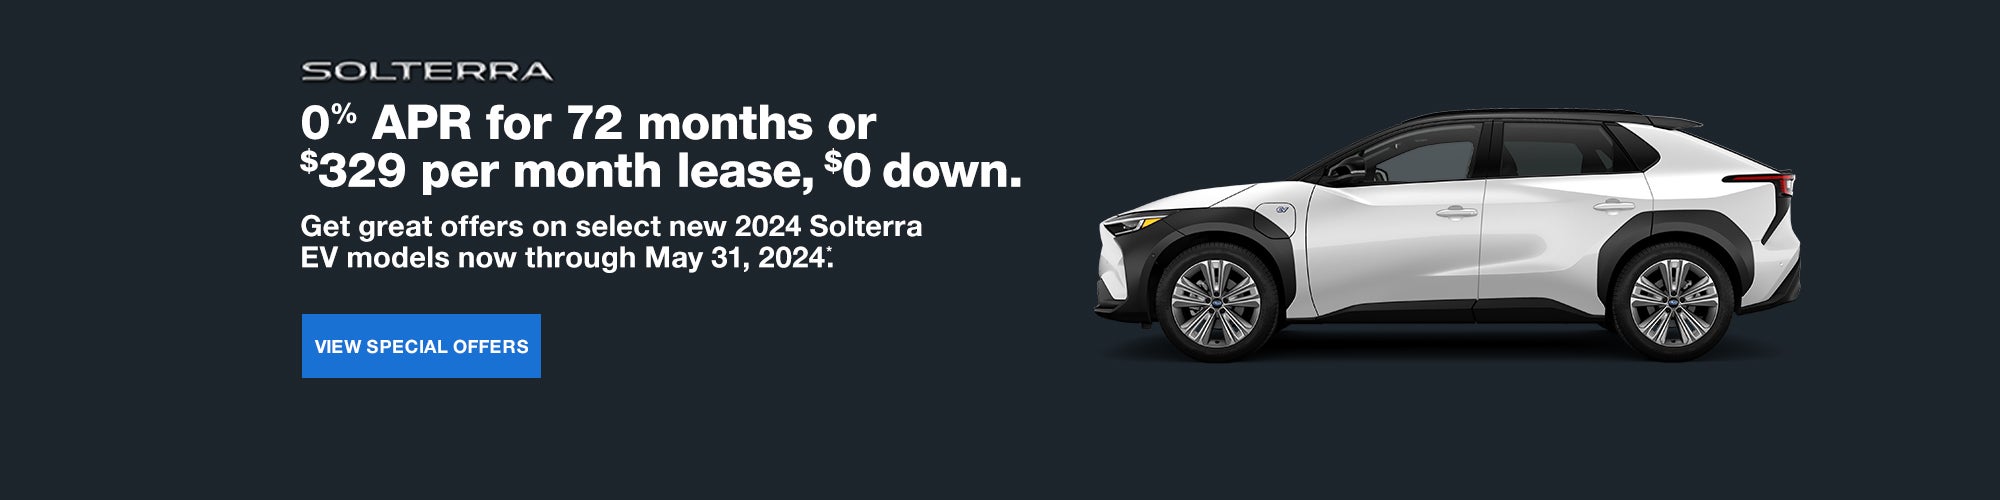 0% APR for 72 months or $329/month lease $0 down Solterra